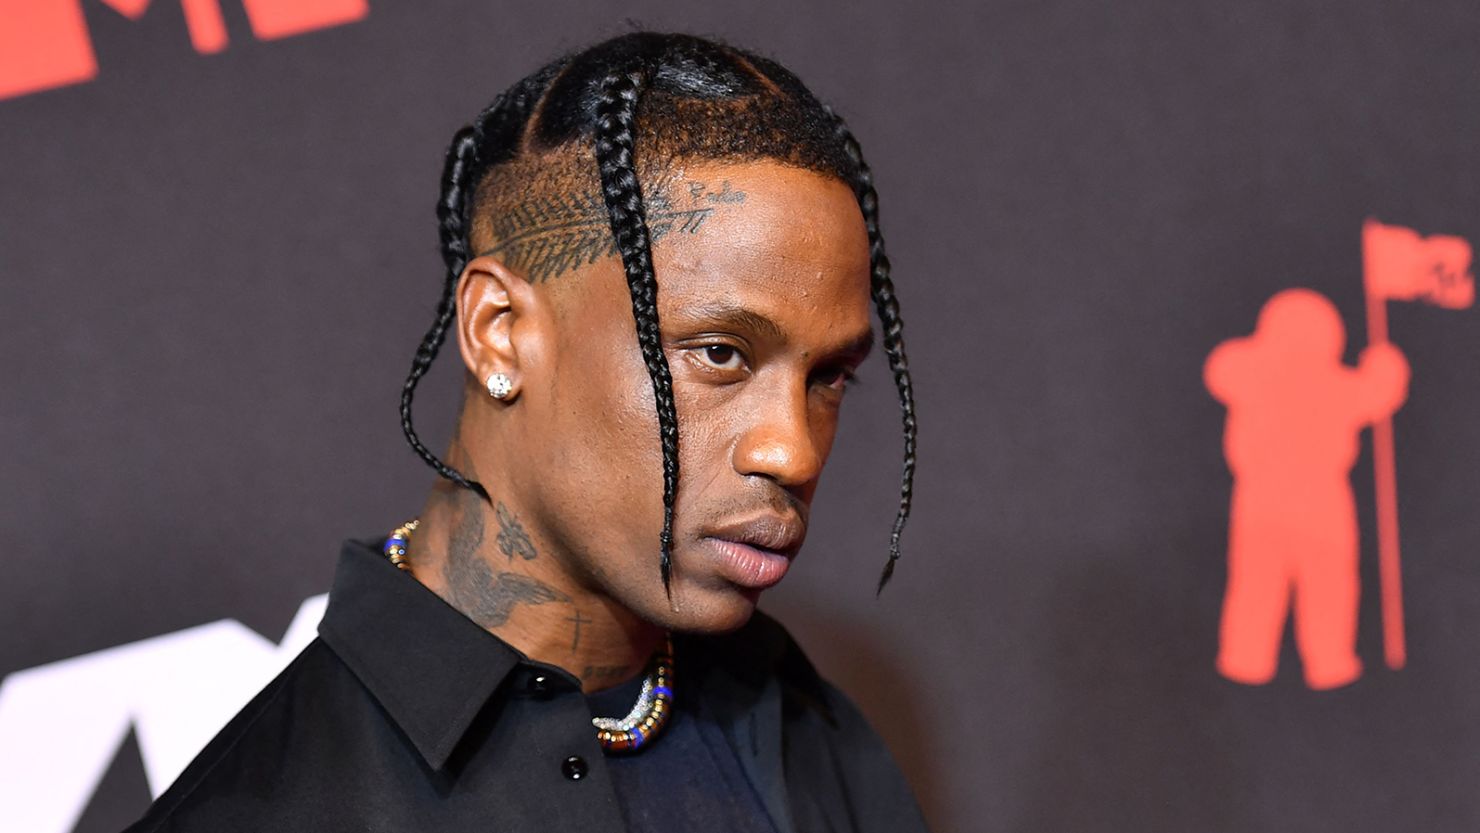 Travis Scott to take the stage tonight in first major appearance since  Astroworld tragedy